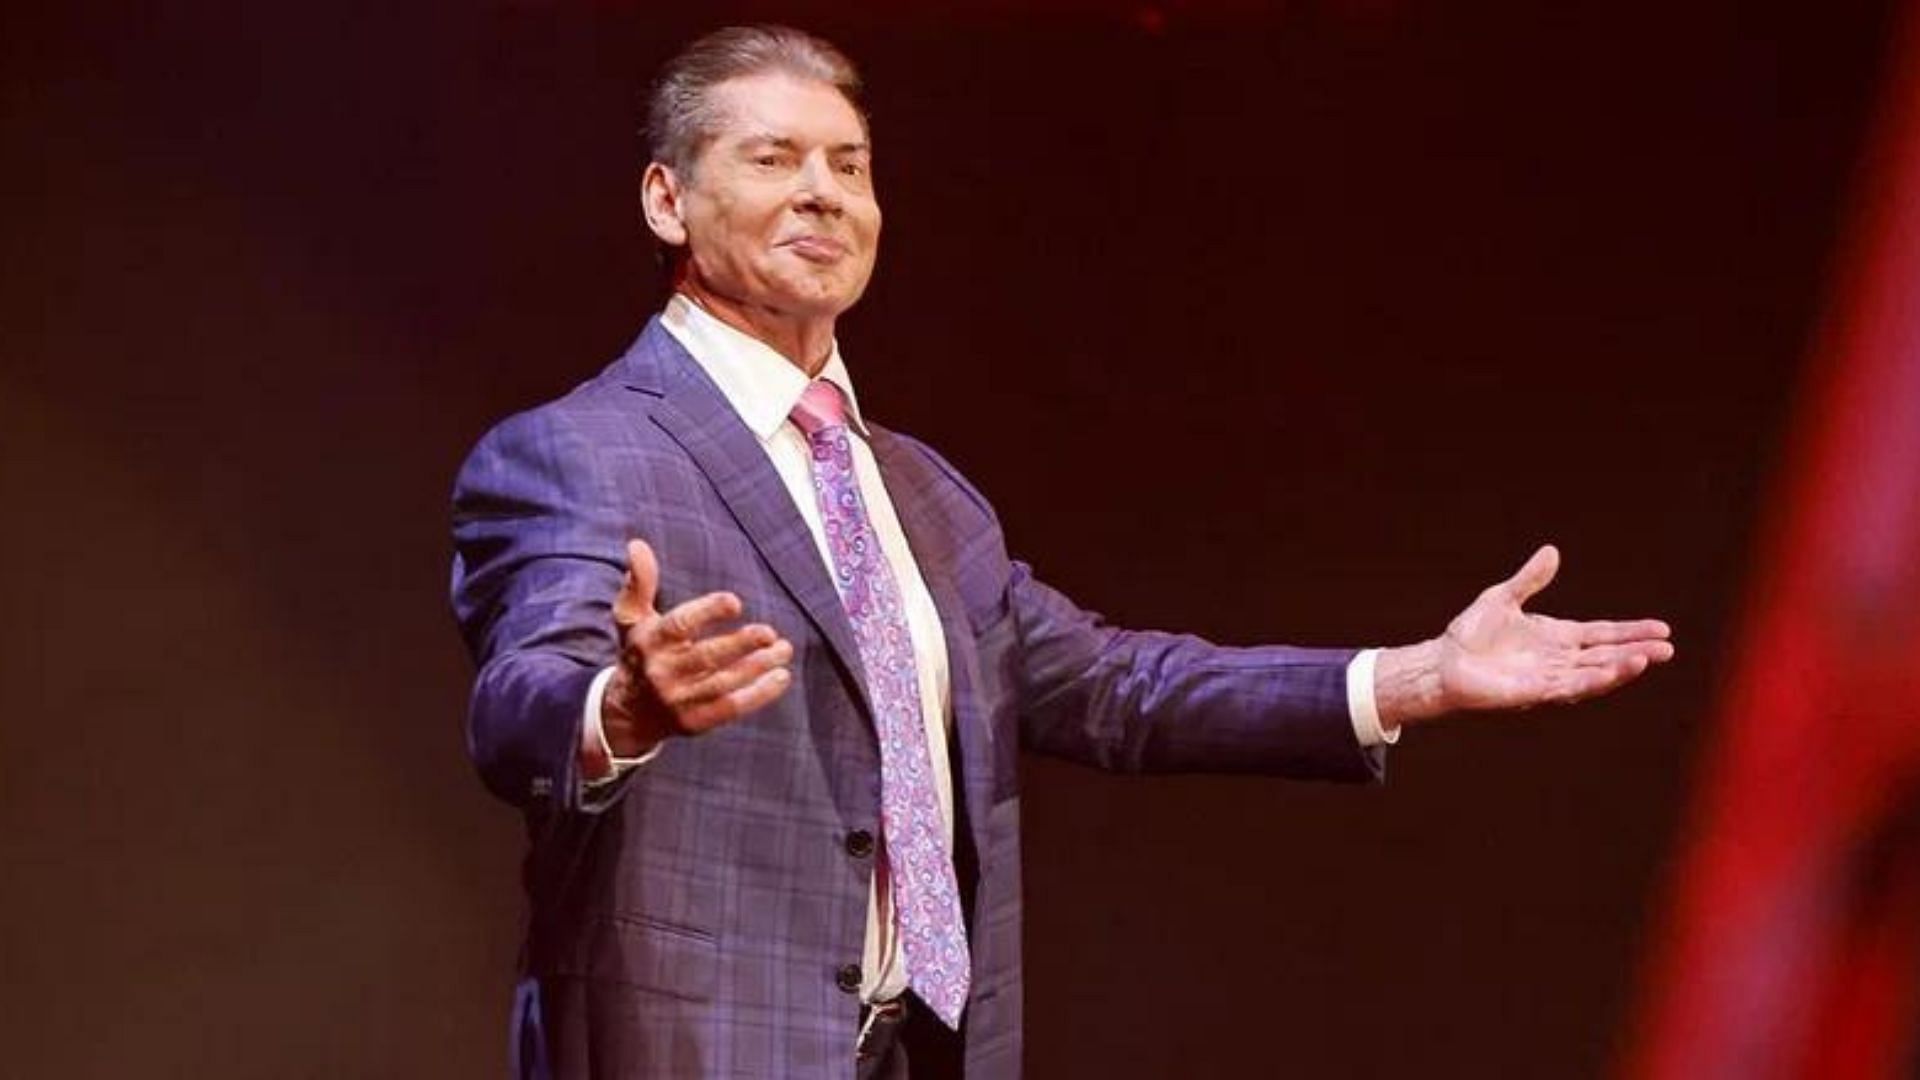 WWE Chairman Vince McMahon is known to be a hard task master